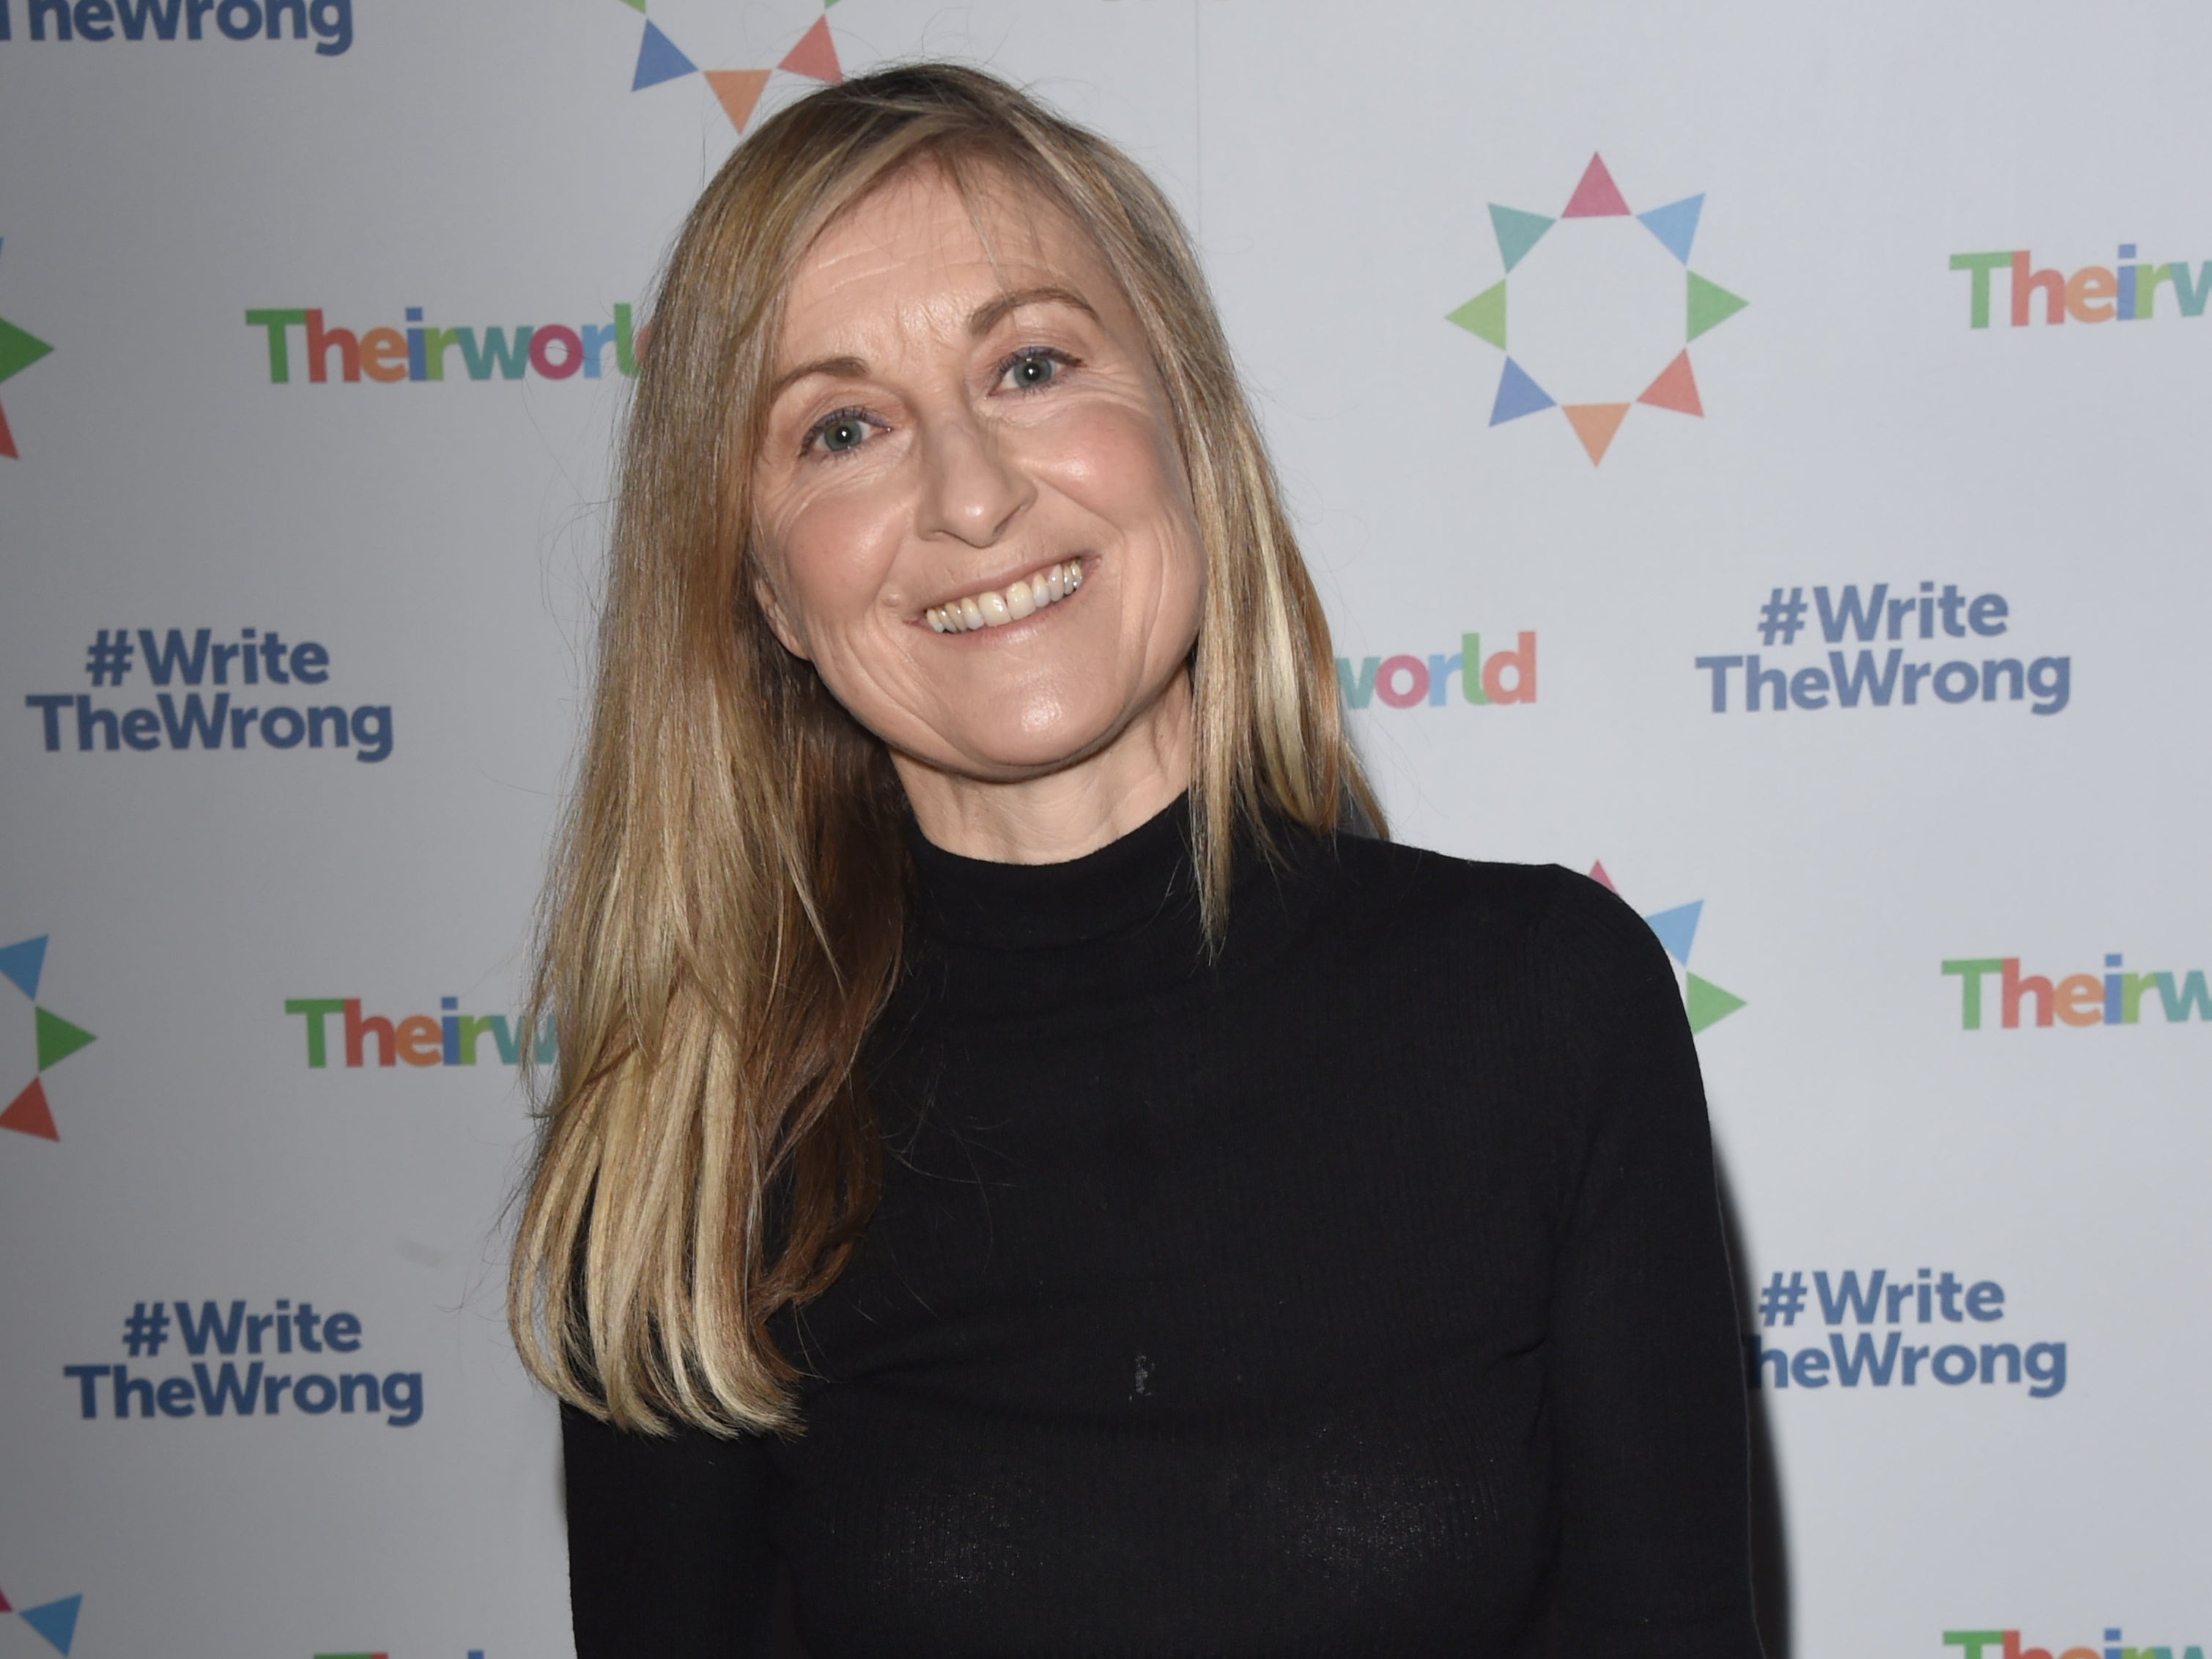 Fiona Phillips is best known for her presenting roles with the ITV Breakfast programme GMTV Today